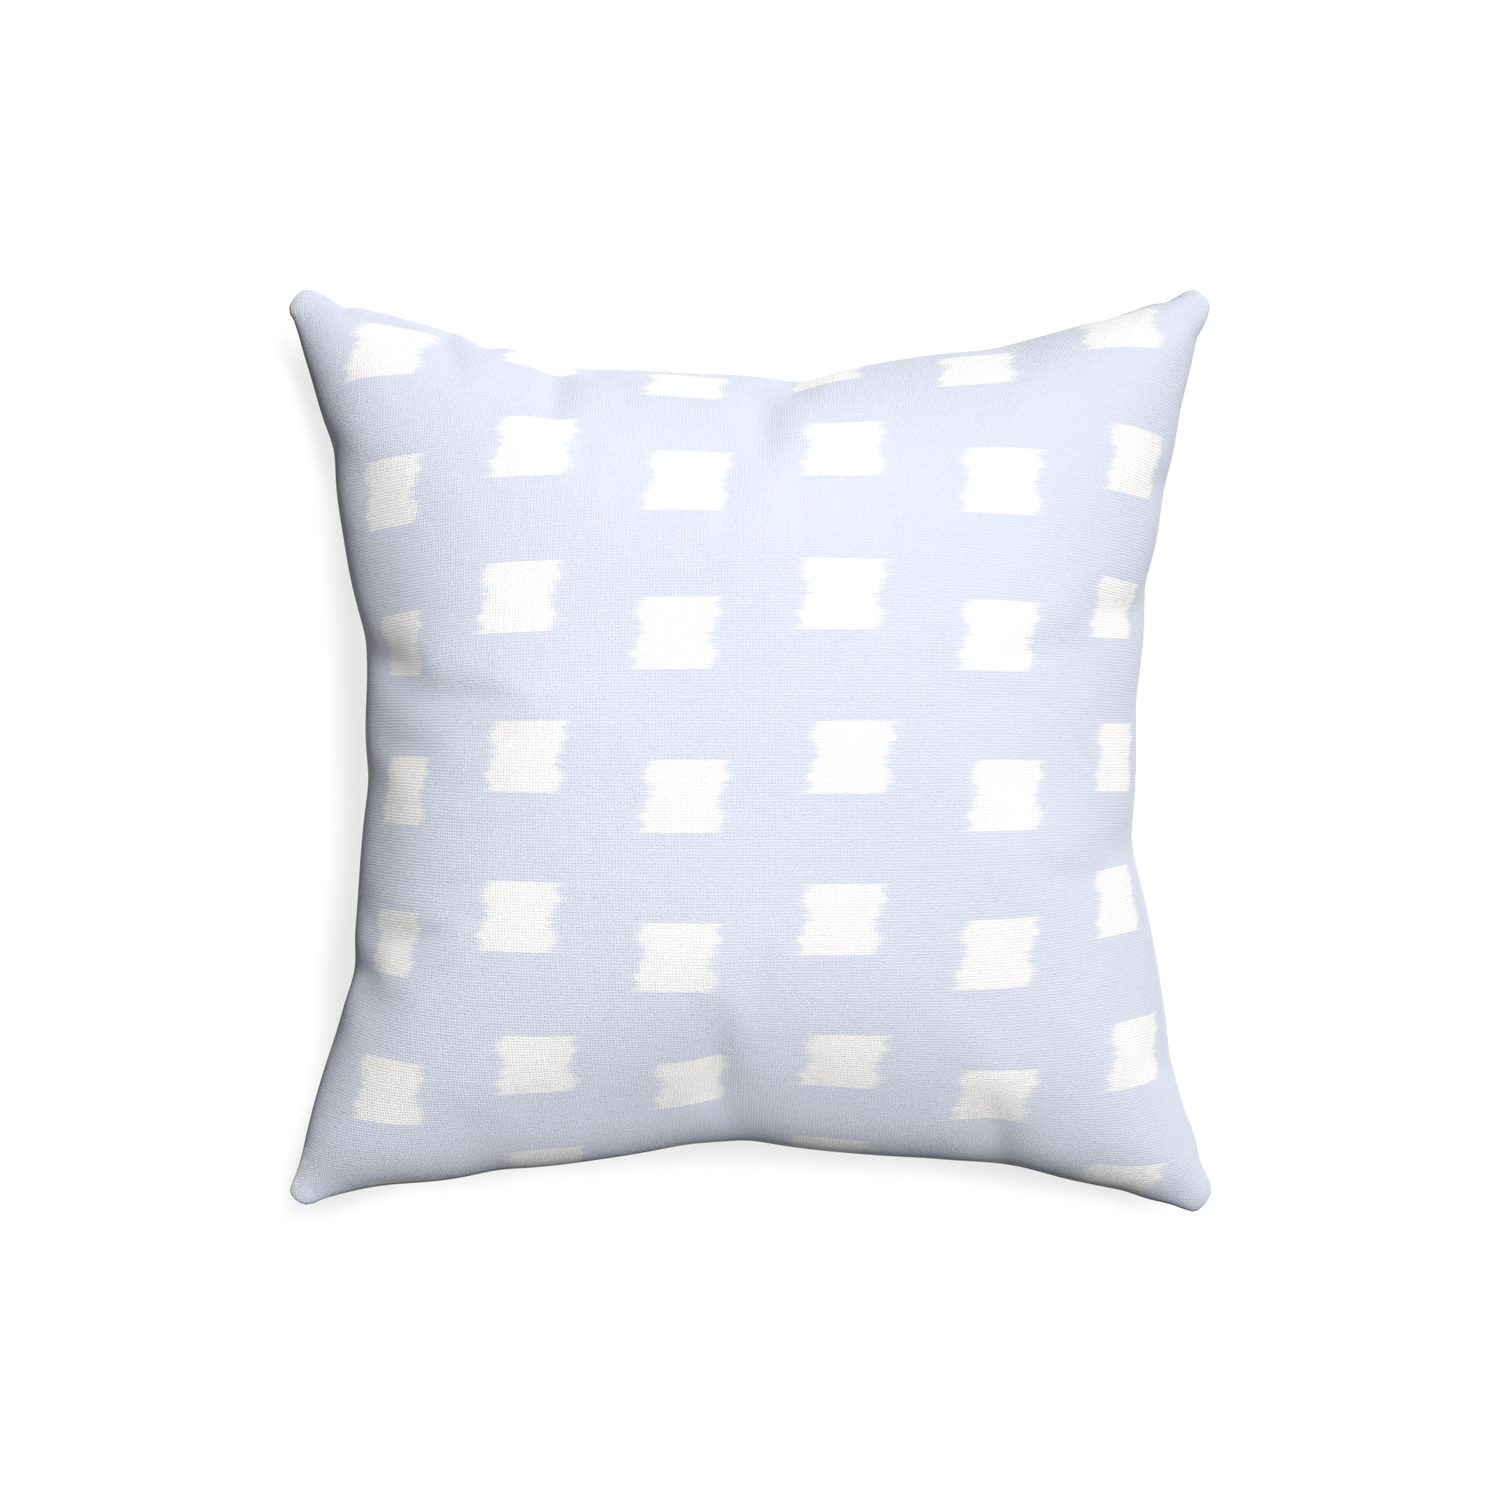 20-square denton custom pillow with none on white background